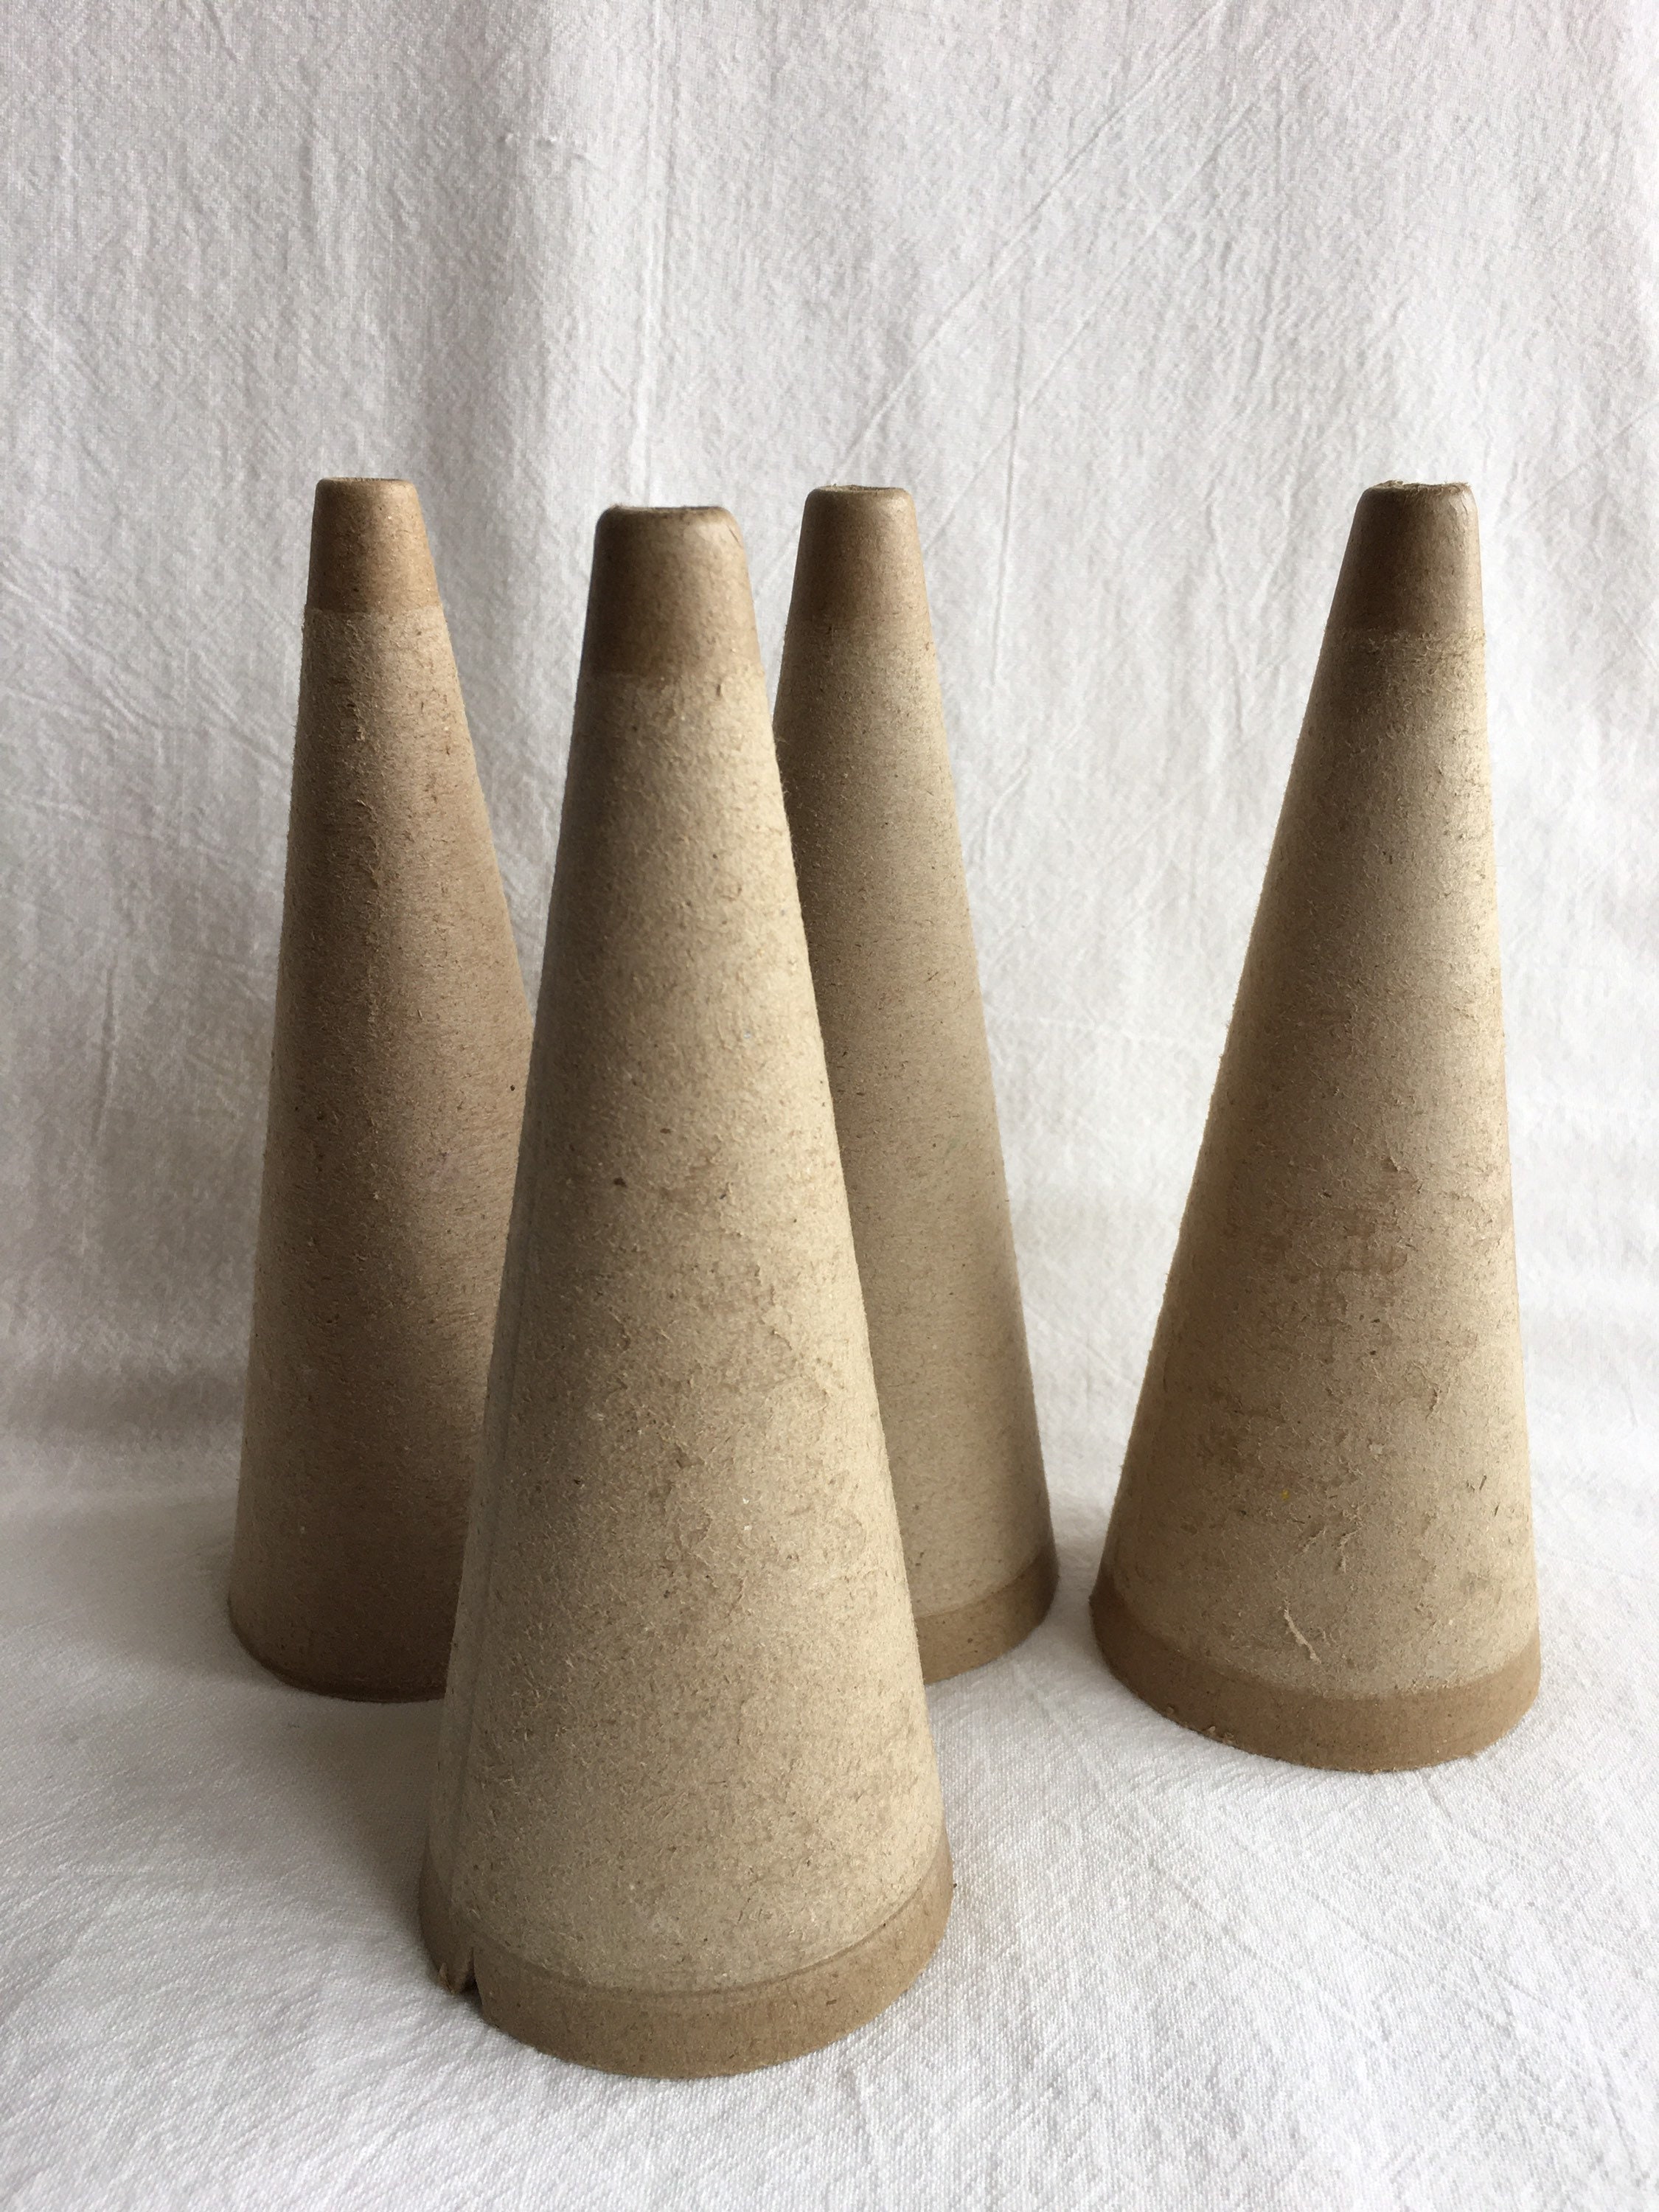 Extra Large Styrofoam Cones in Sets of Two, Two Sizes Height 30 Cm